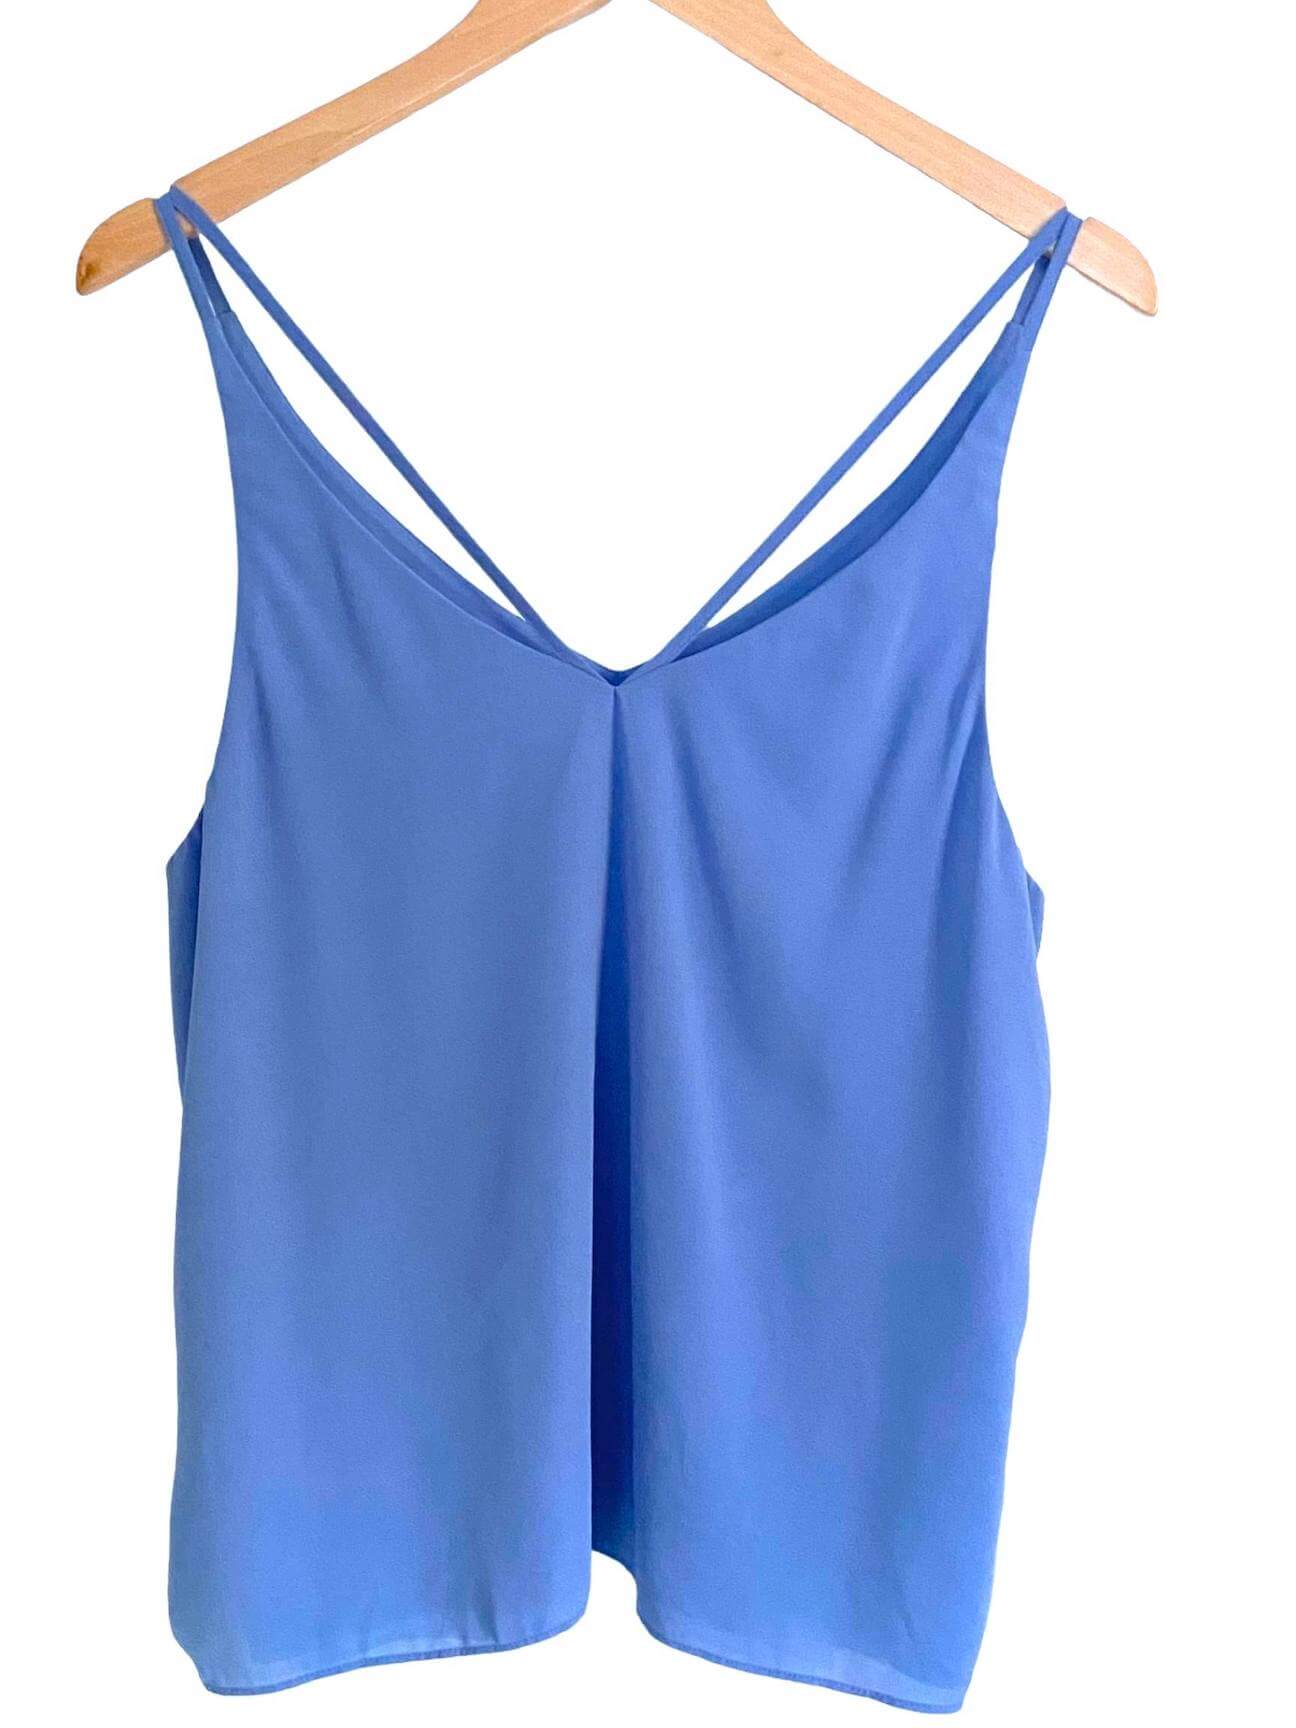 Cool Summer TOPSHOP harbor sky double strap back top